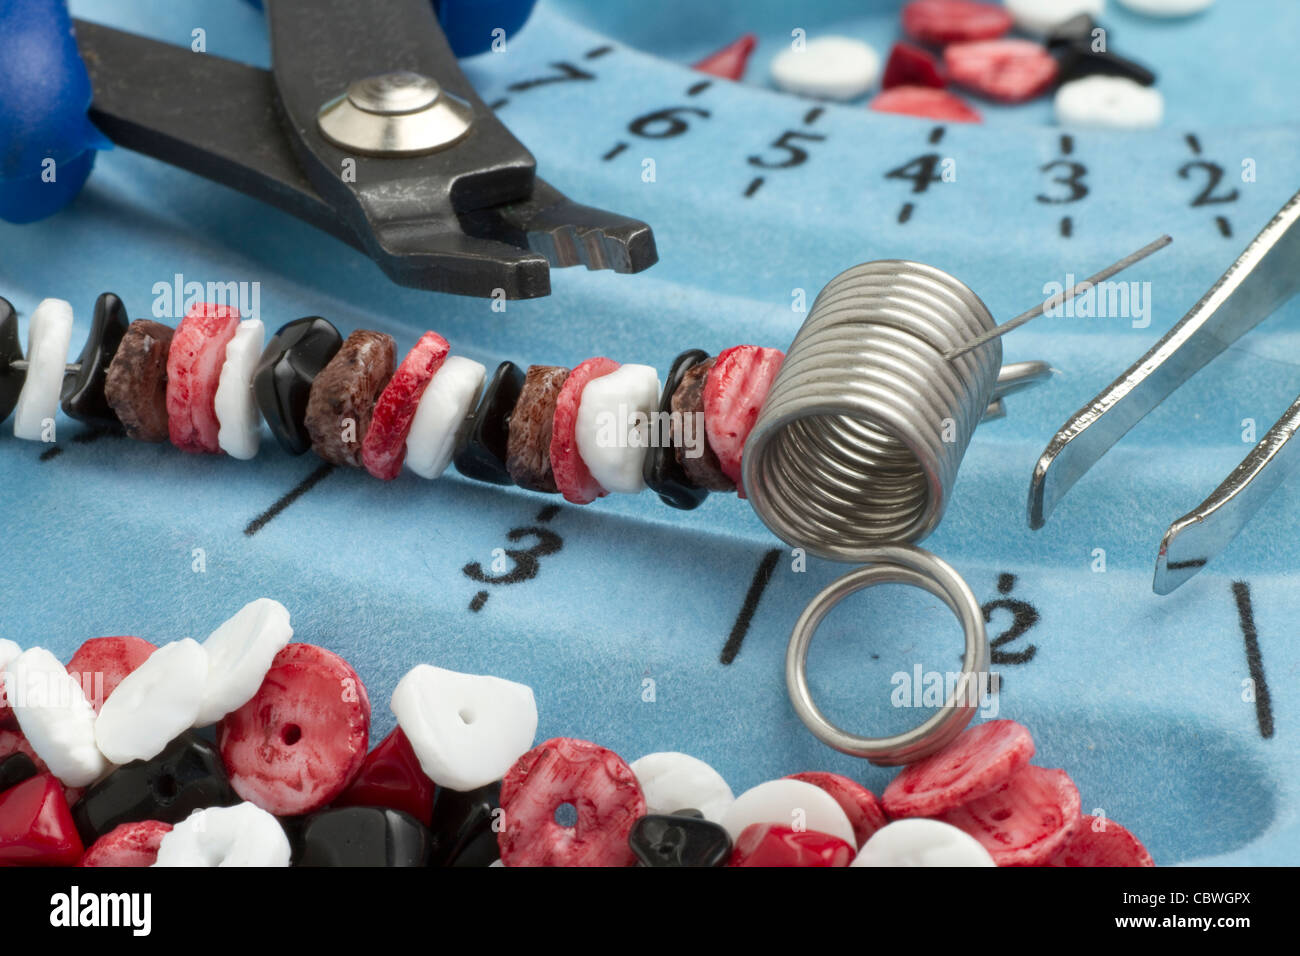 Seen here is a close up of jewelry making and jewelry making equipment Stock Photo